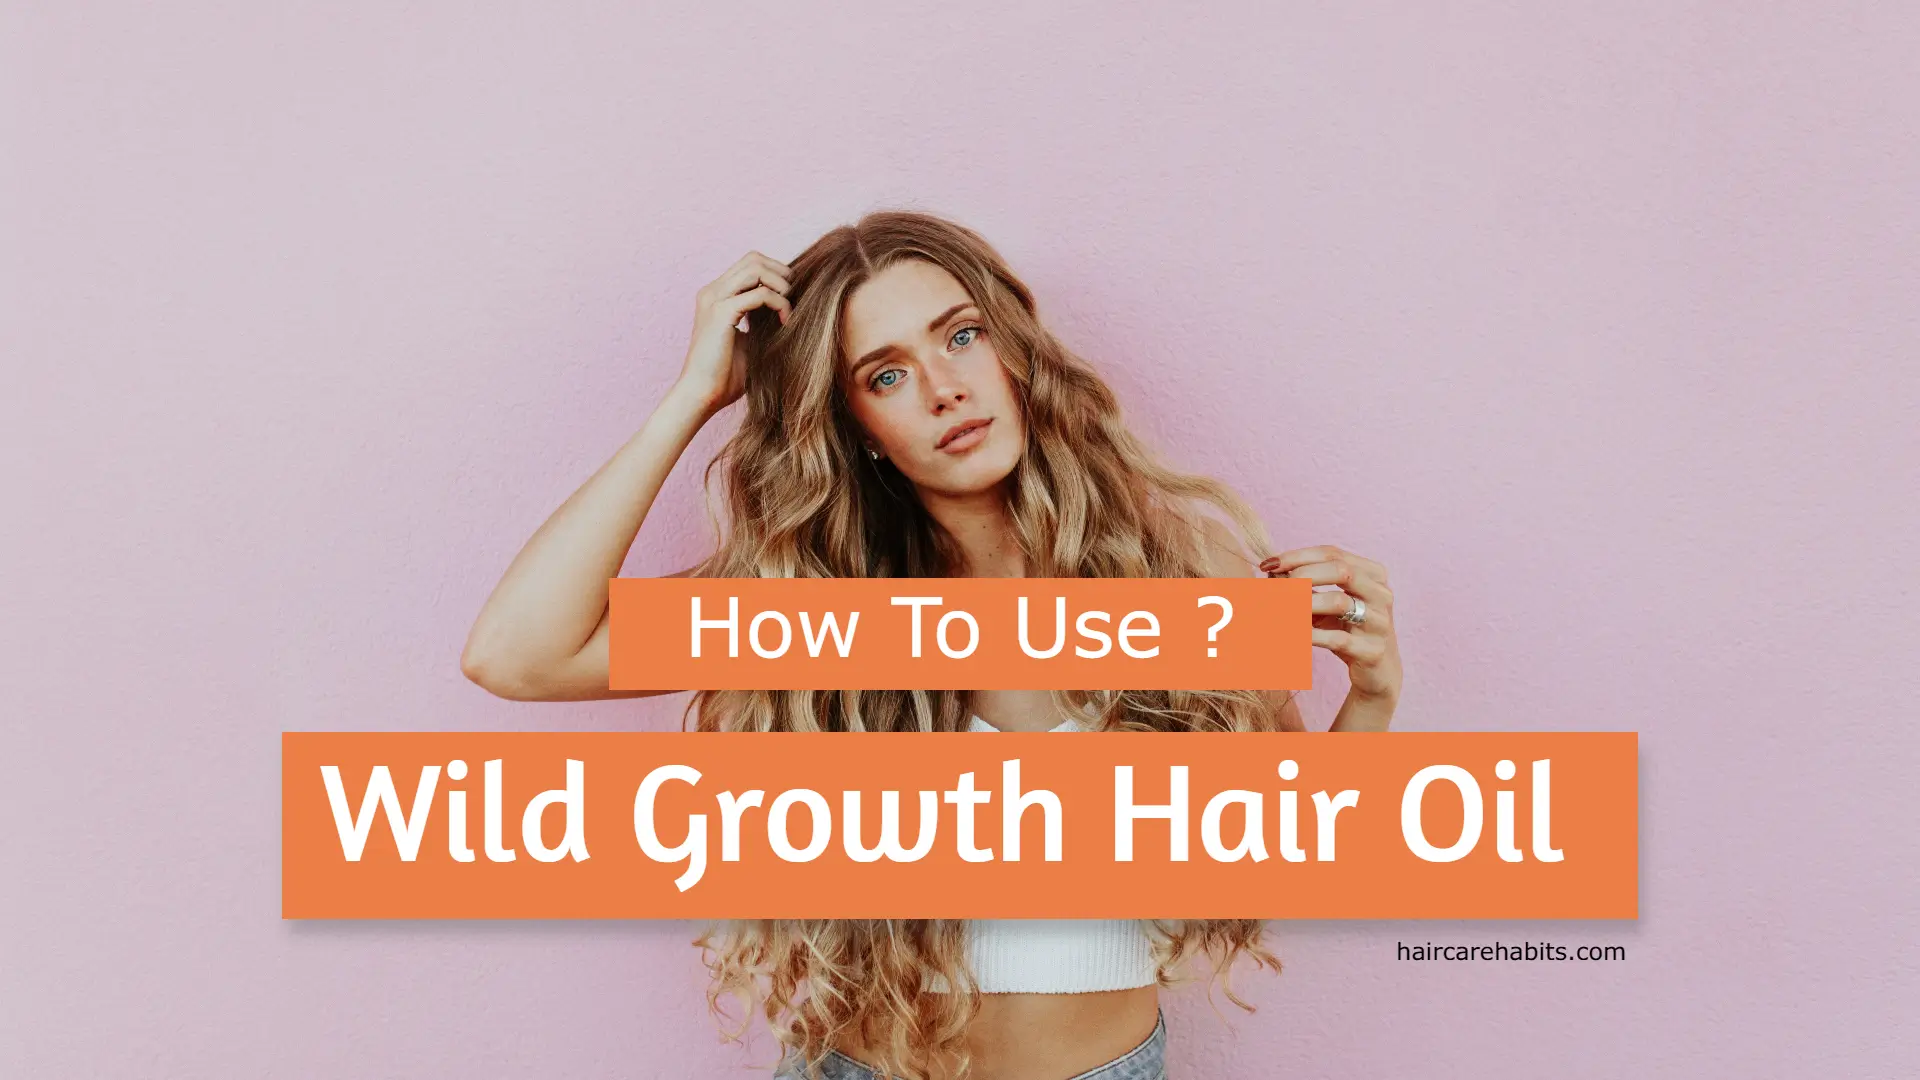 How To Use Wild Growth Hair Oil - How does it work? - Hair Care Habits